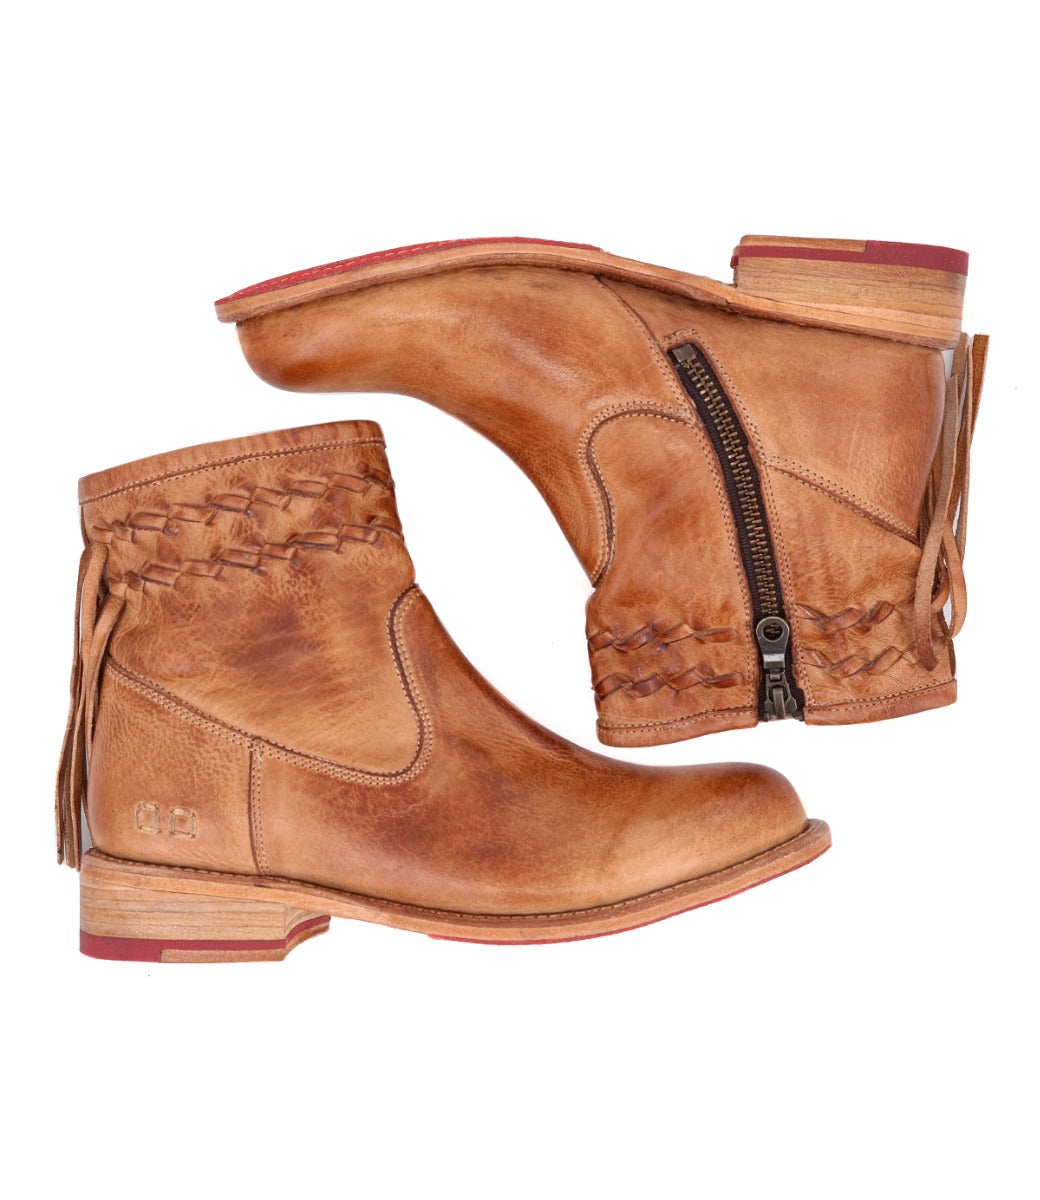 A pair of Craven Bed Stu tan leather ankle boots.